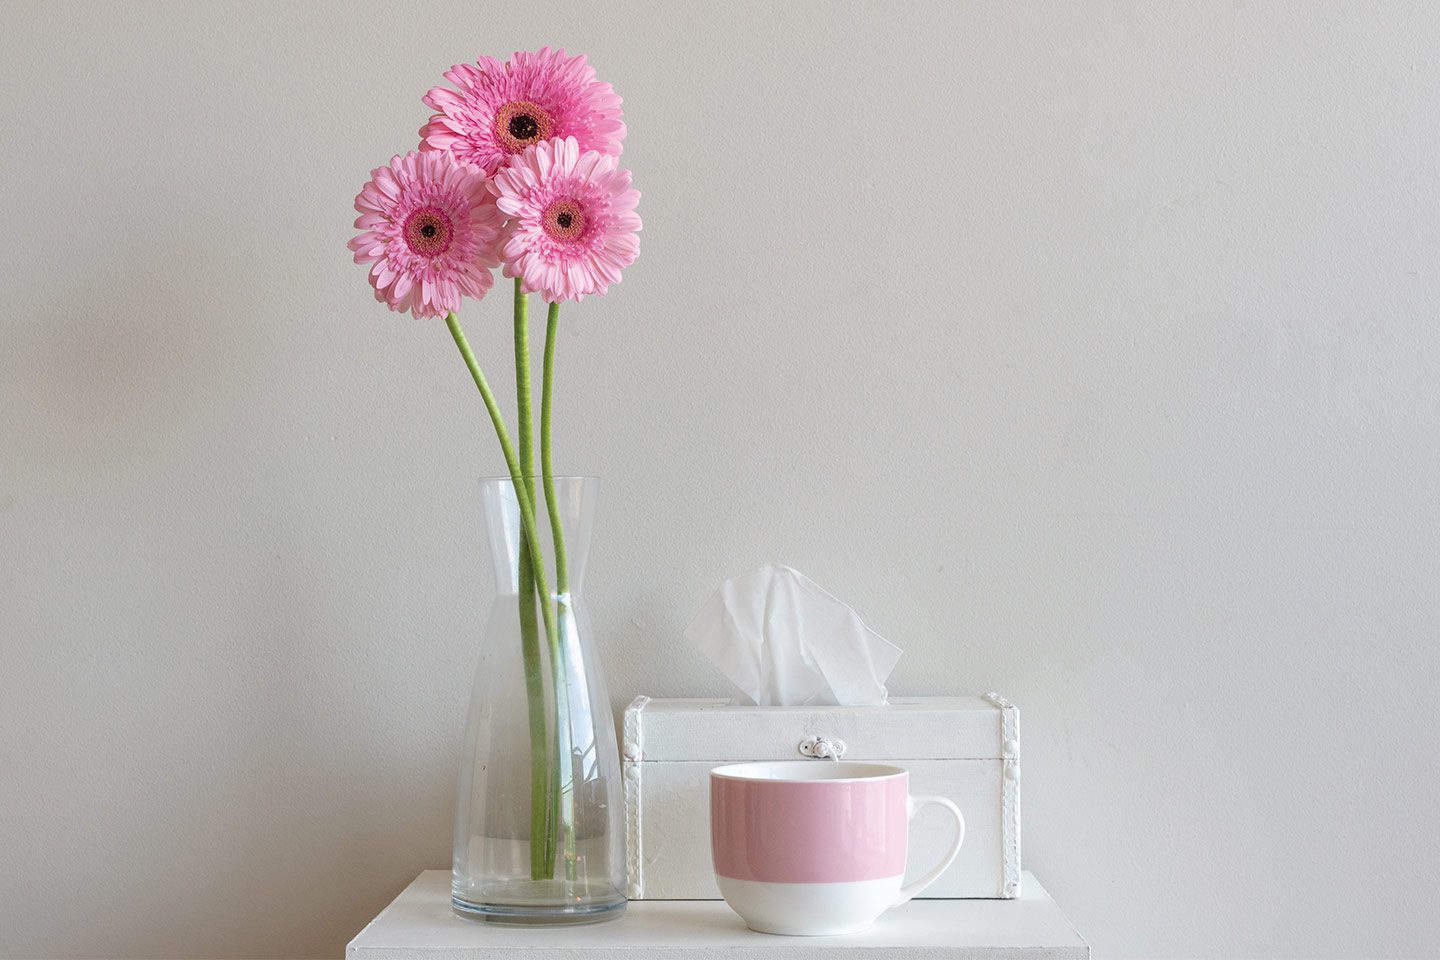 flowers on a night stand with a mug of tea and a tissue box